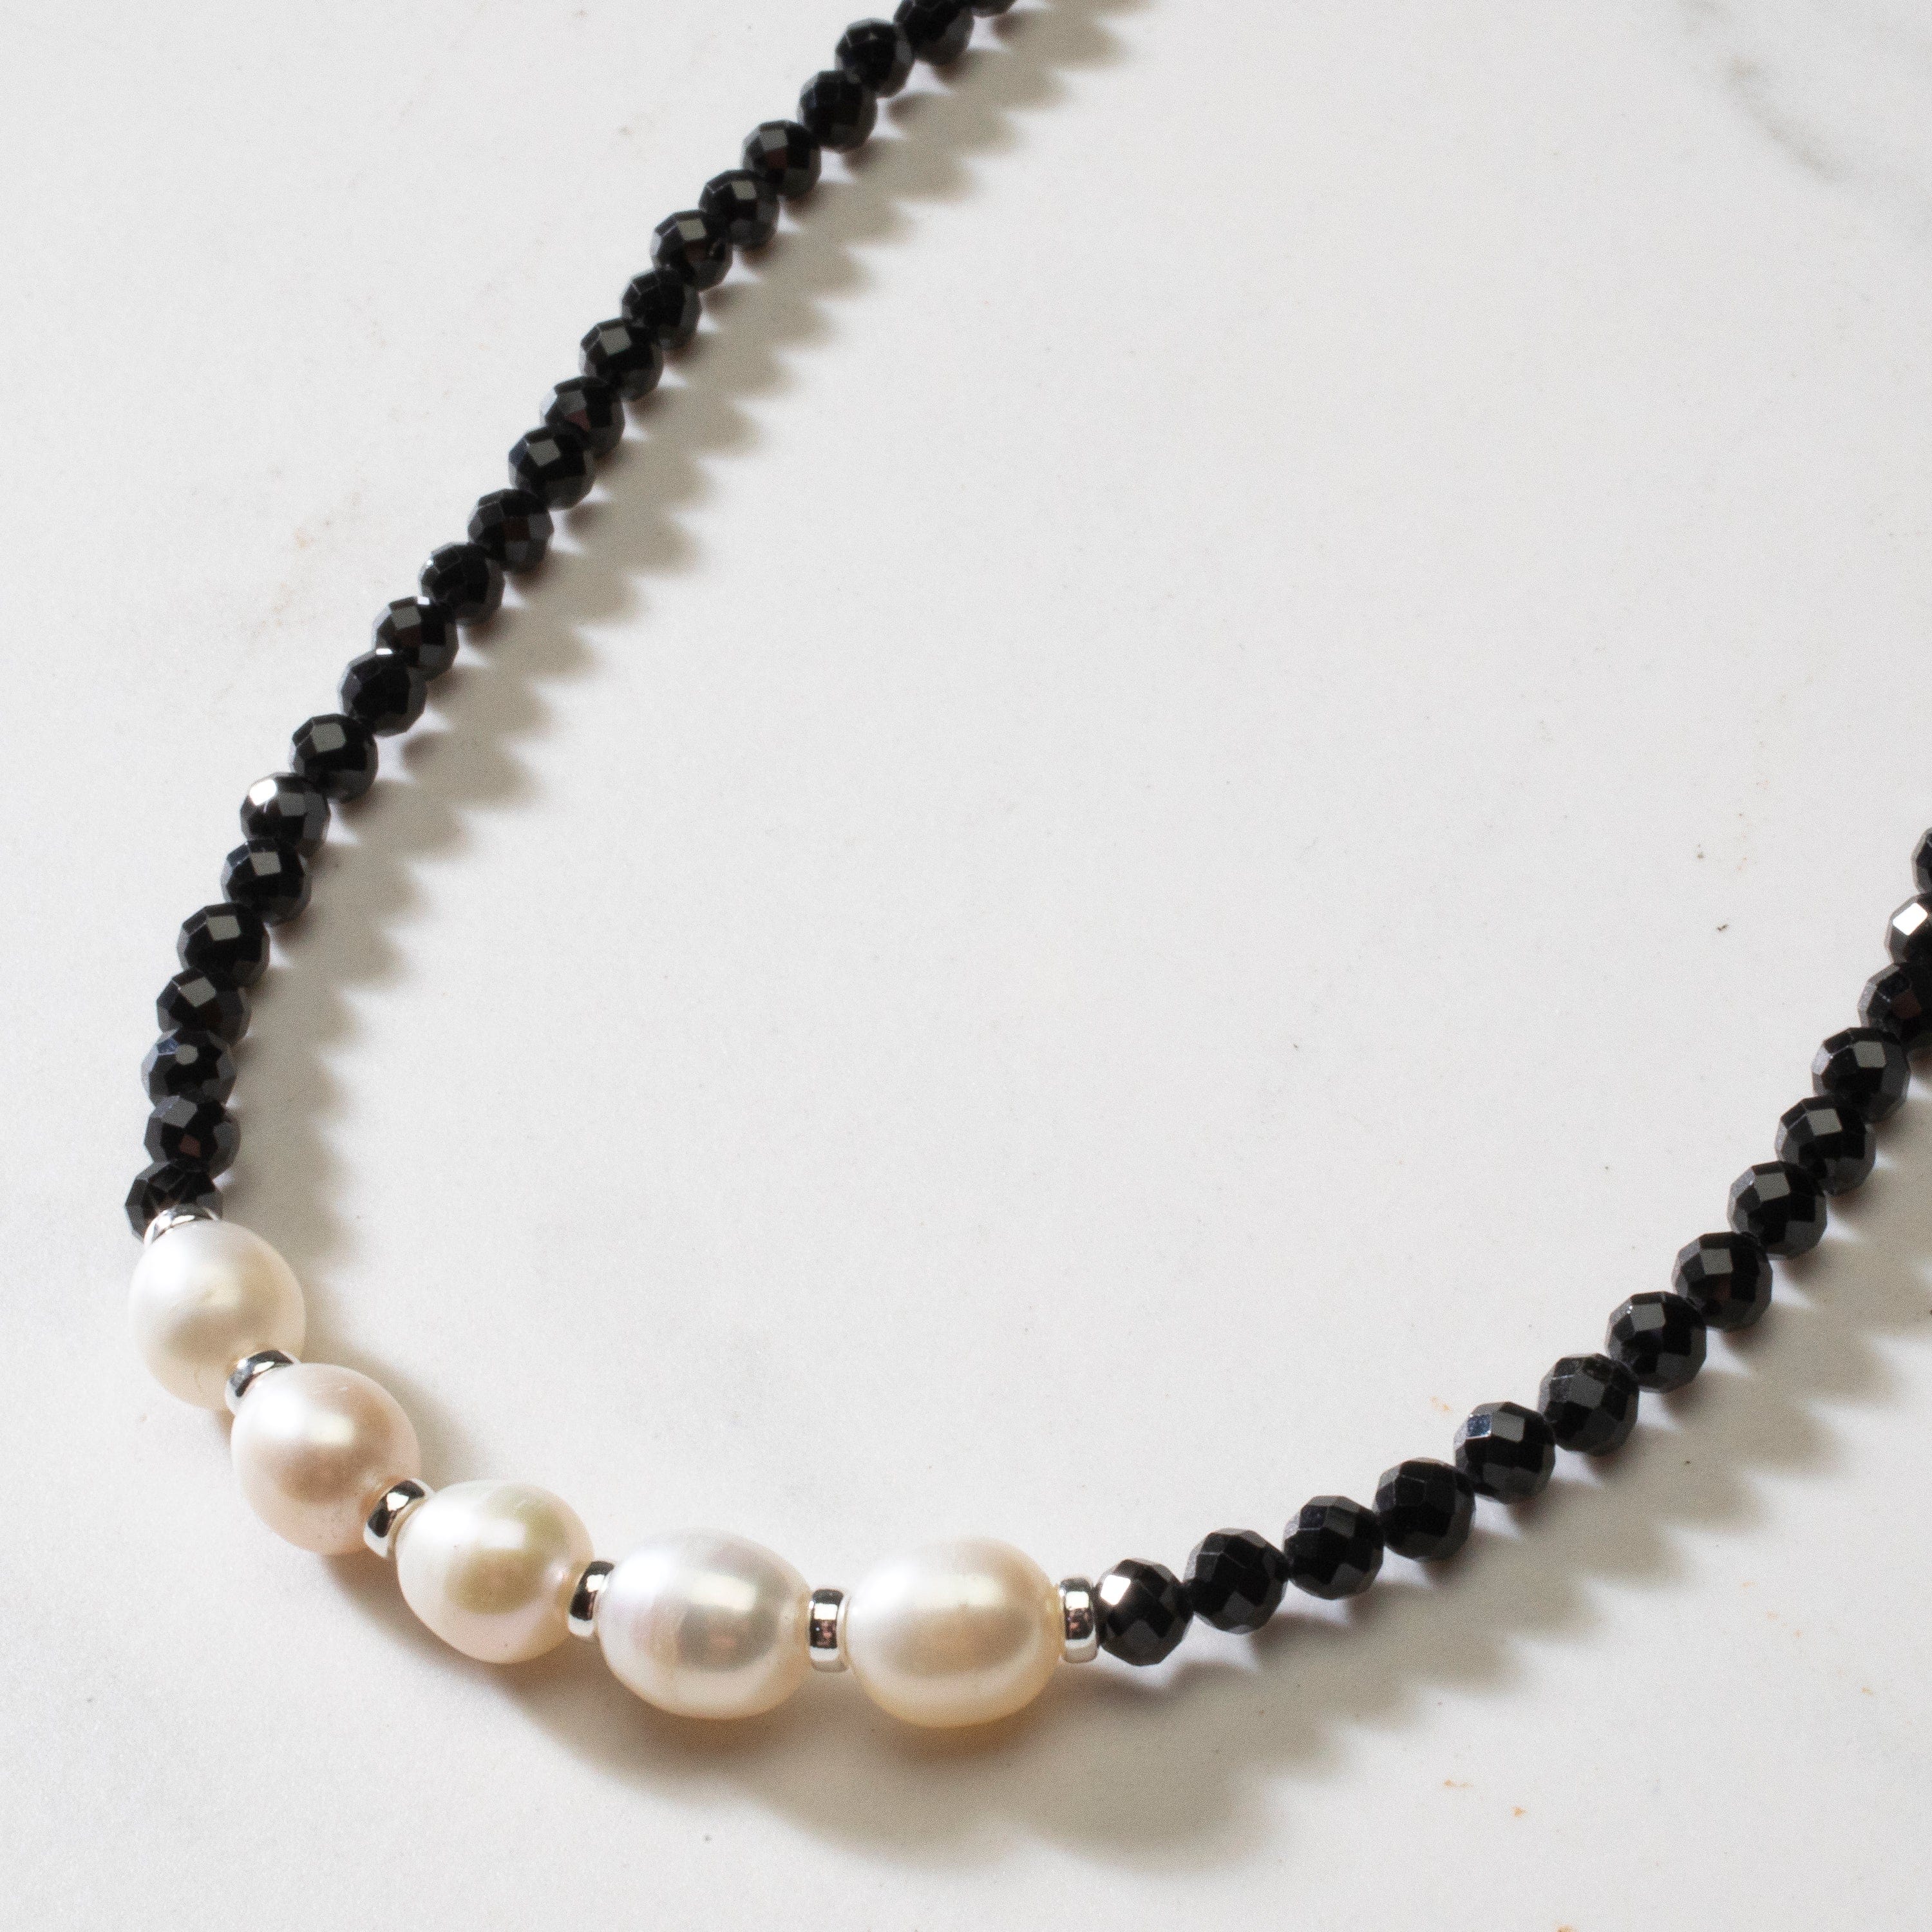 KALIFANO Jewelry 4mm Faceted Black Spinel Bead Necklace with 5 Pearls with 925 Silver Clasp 4MBS